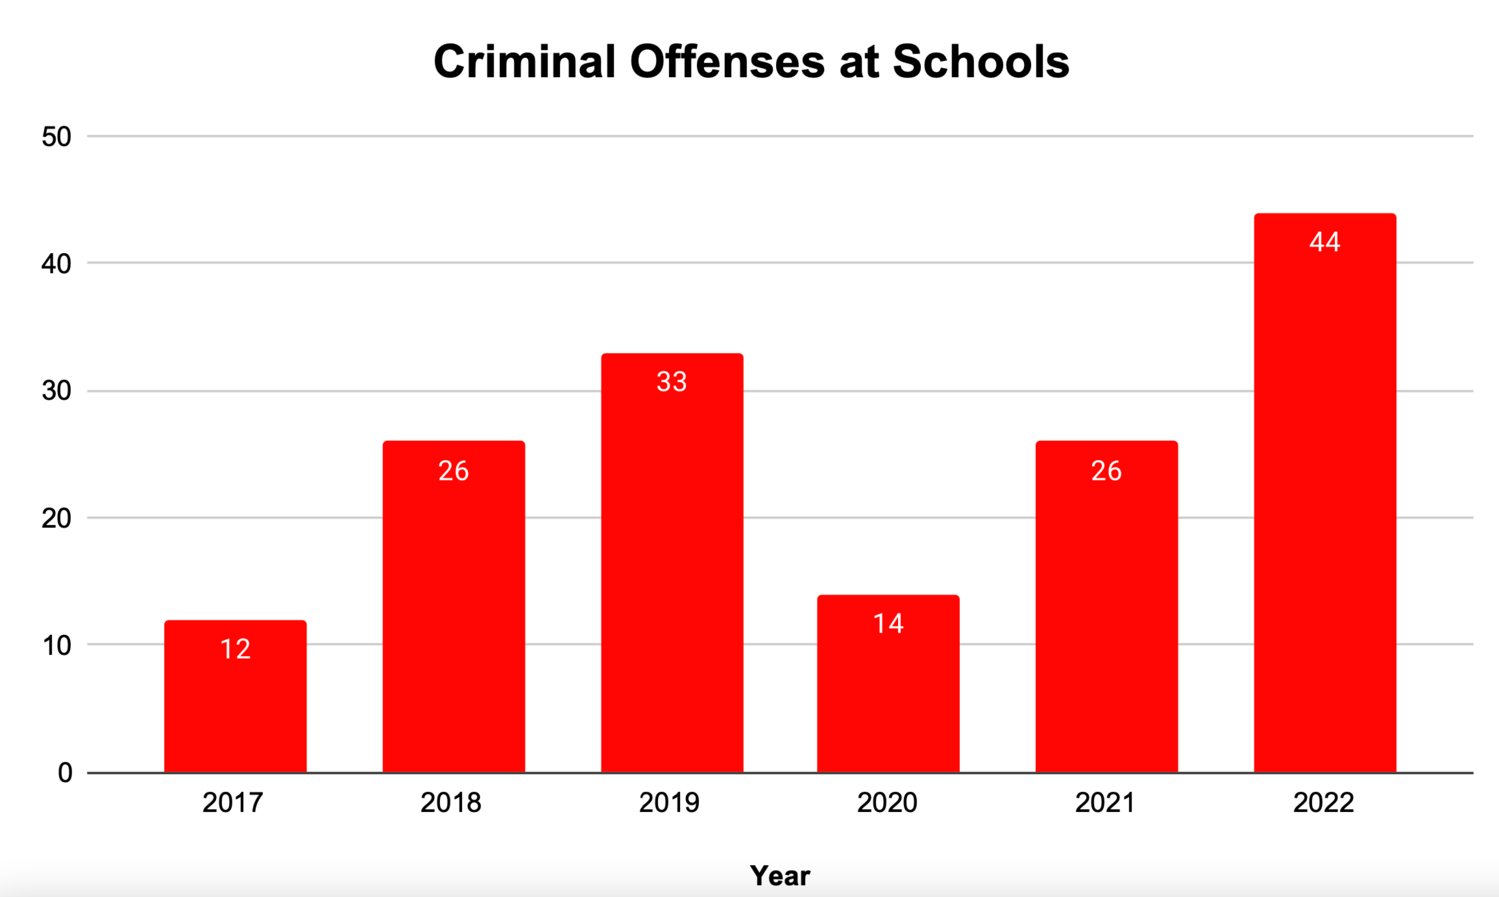 Similar to the youth arrests overall, the number of offenses that have occurred on school property have also risen significantly from year-to-year since 2020. Note that not each of these offenses led to an arrest, and that there were fewer than 5 incidents occurring within a school building during school hours.